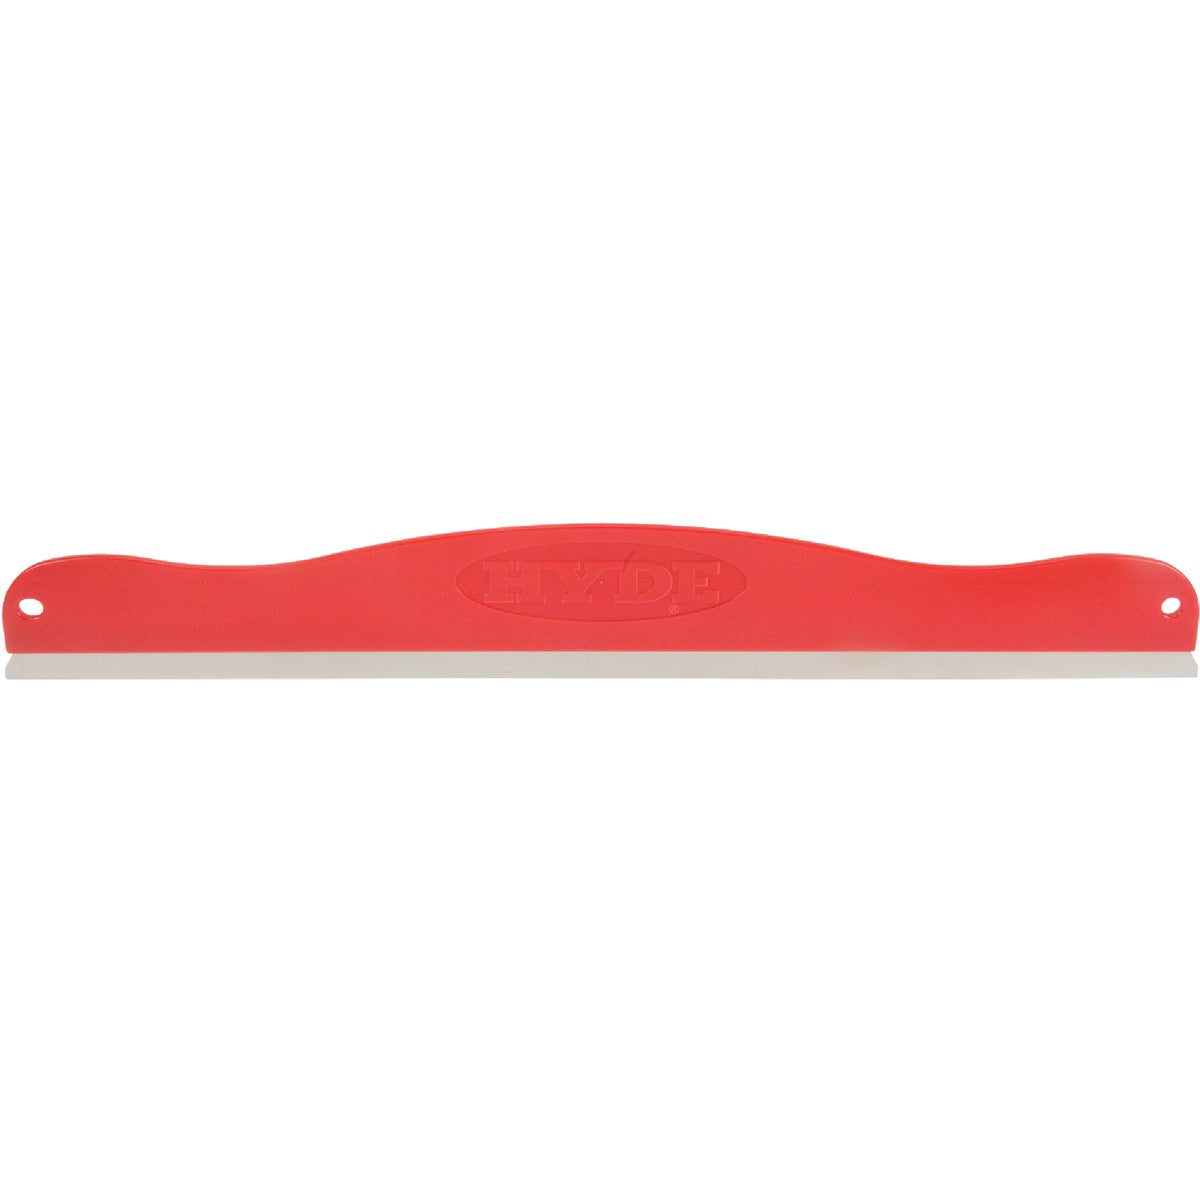 Hyde 24-1/2 In. Guide, Paint Shield & Smoothing Tool